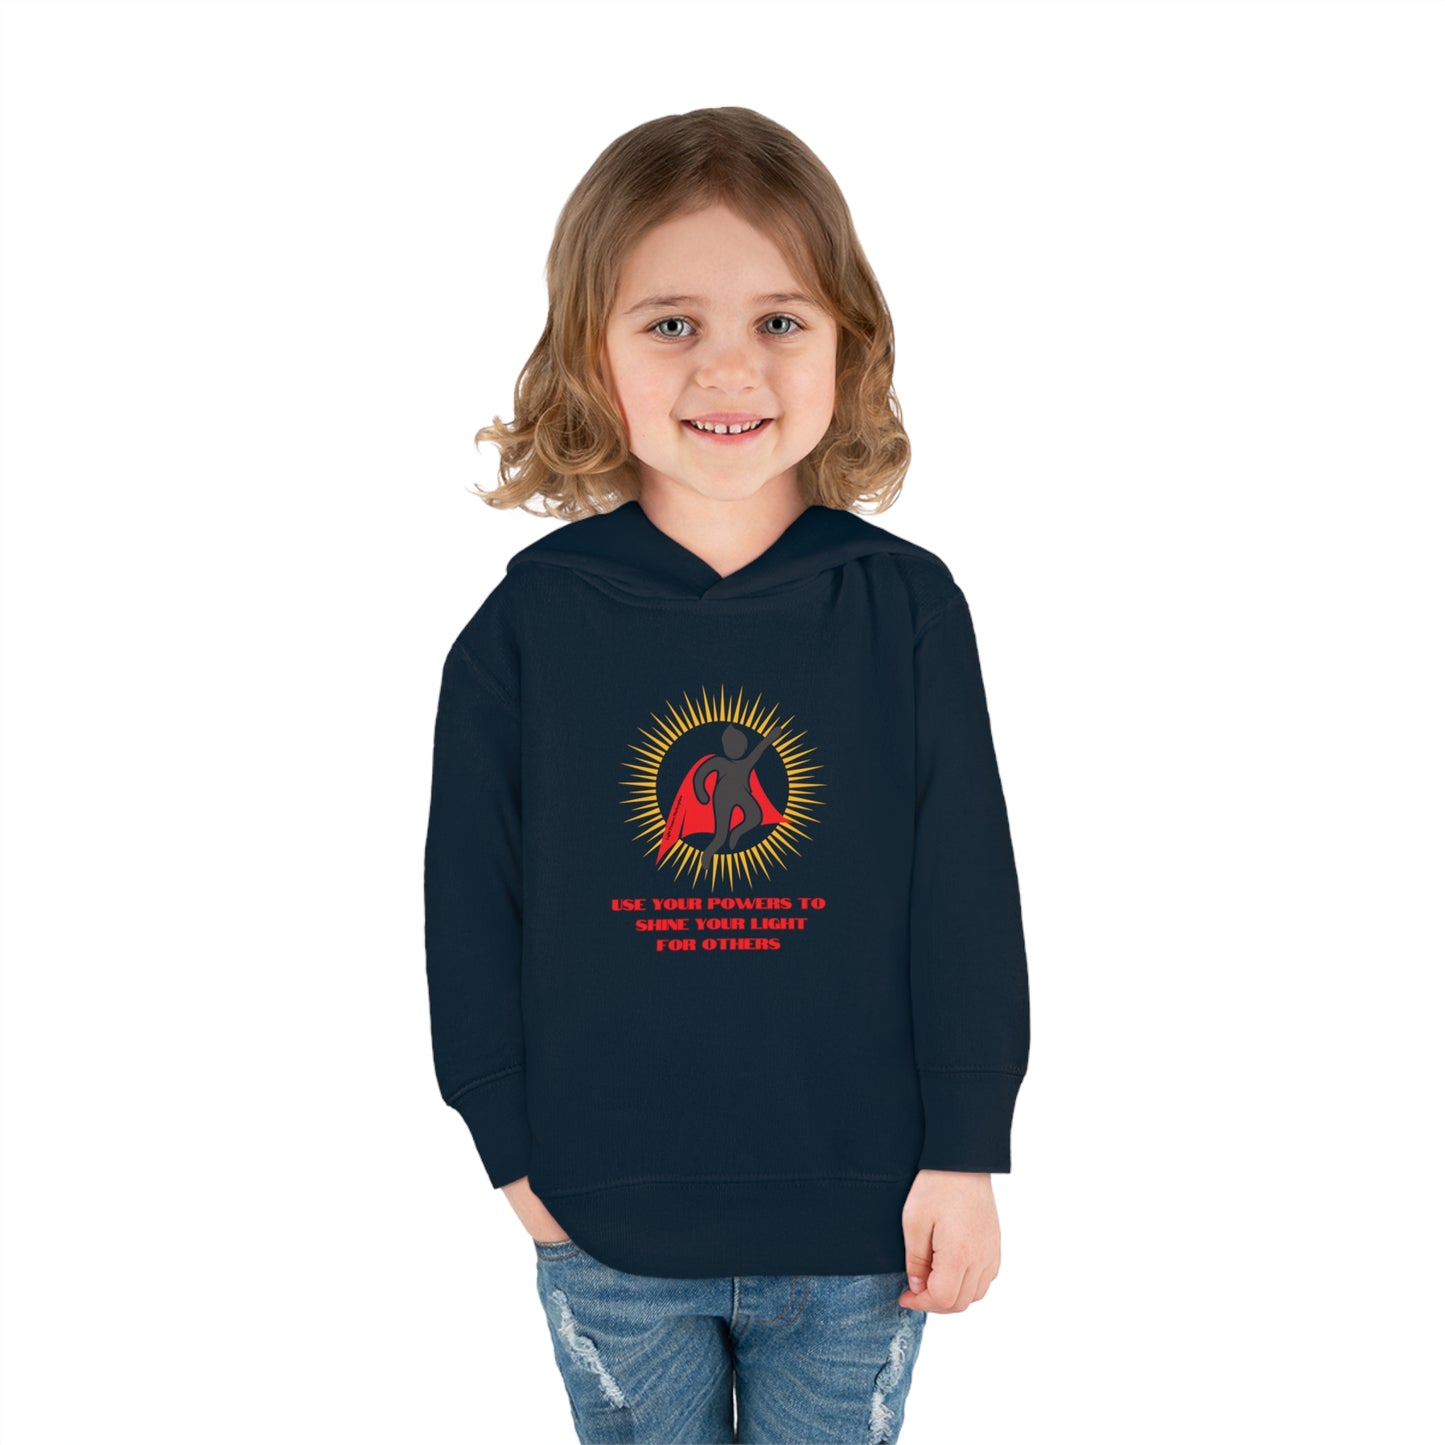 Light Passers Marketplace Use Your Powers Toddler Hoodie Inspirational Messages, Simple Messages, Mental Health